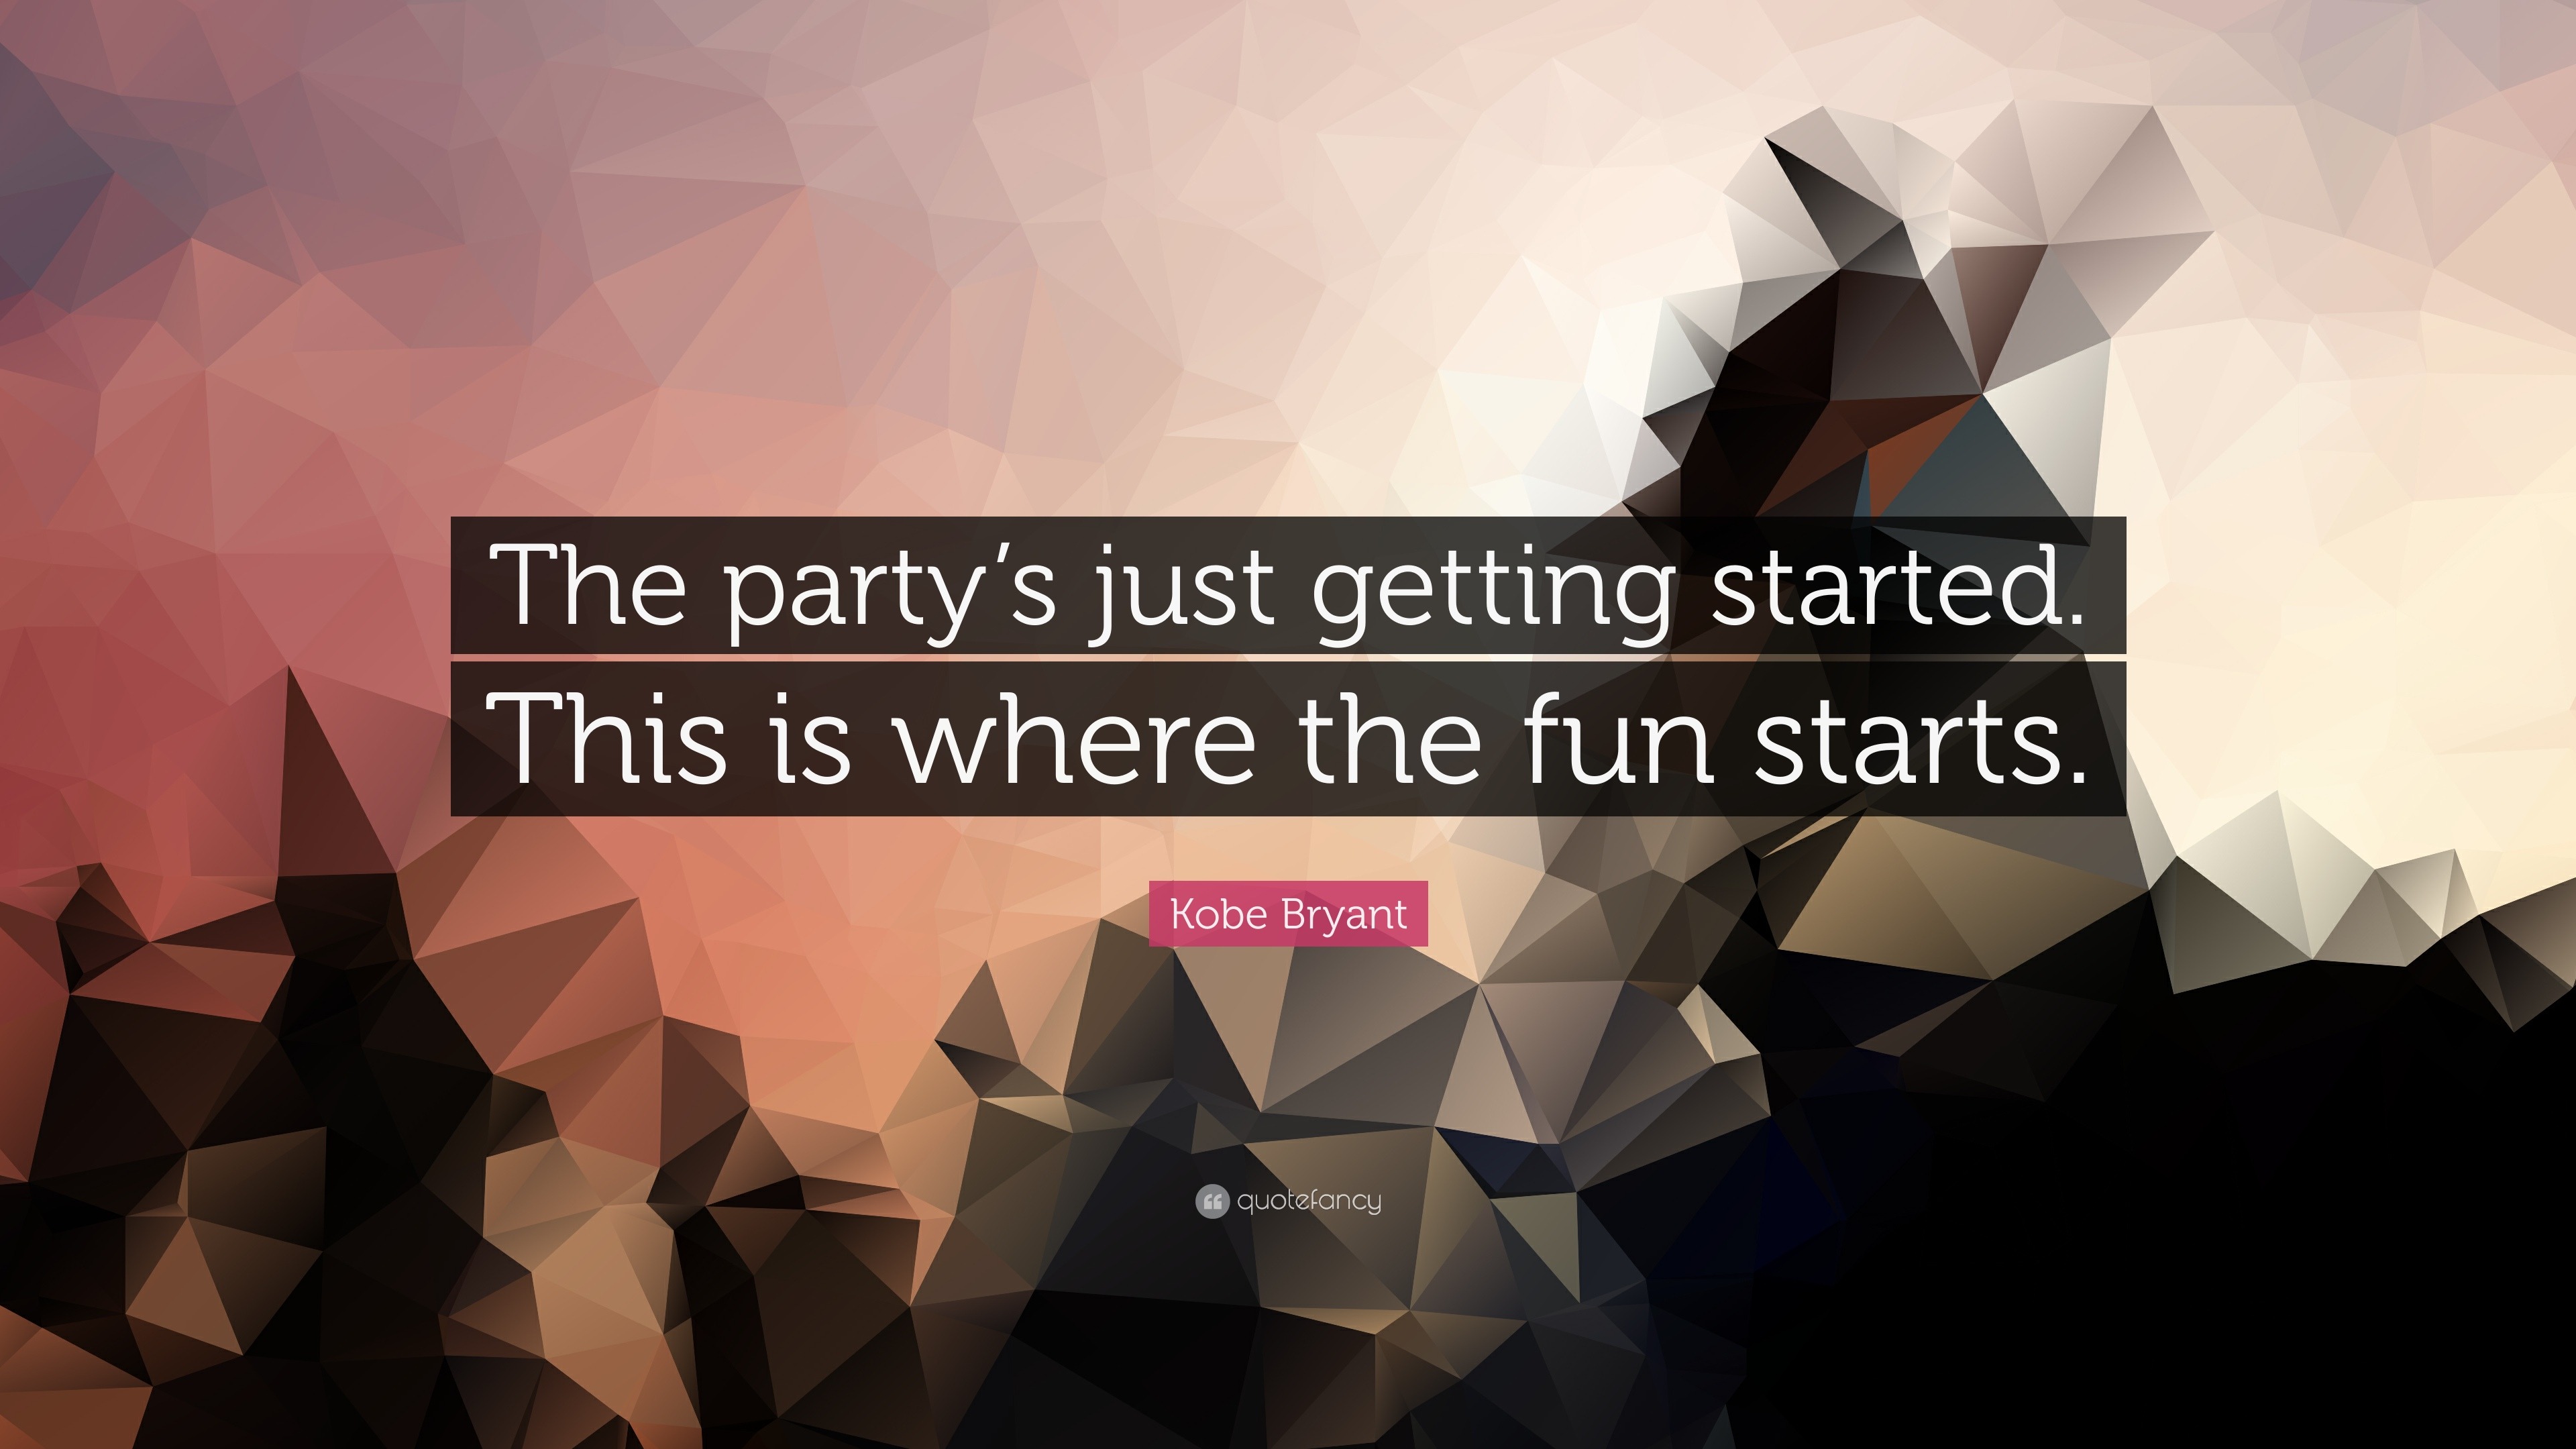 https://quotefancy.com/media/wallpaper/3840x2160/63960-Kobe-Bryant-Quote-The-party-s-just-getting-started-This-is-where.jpg